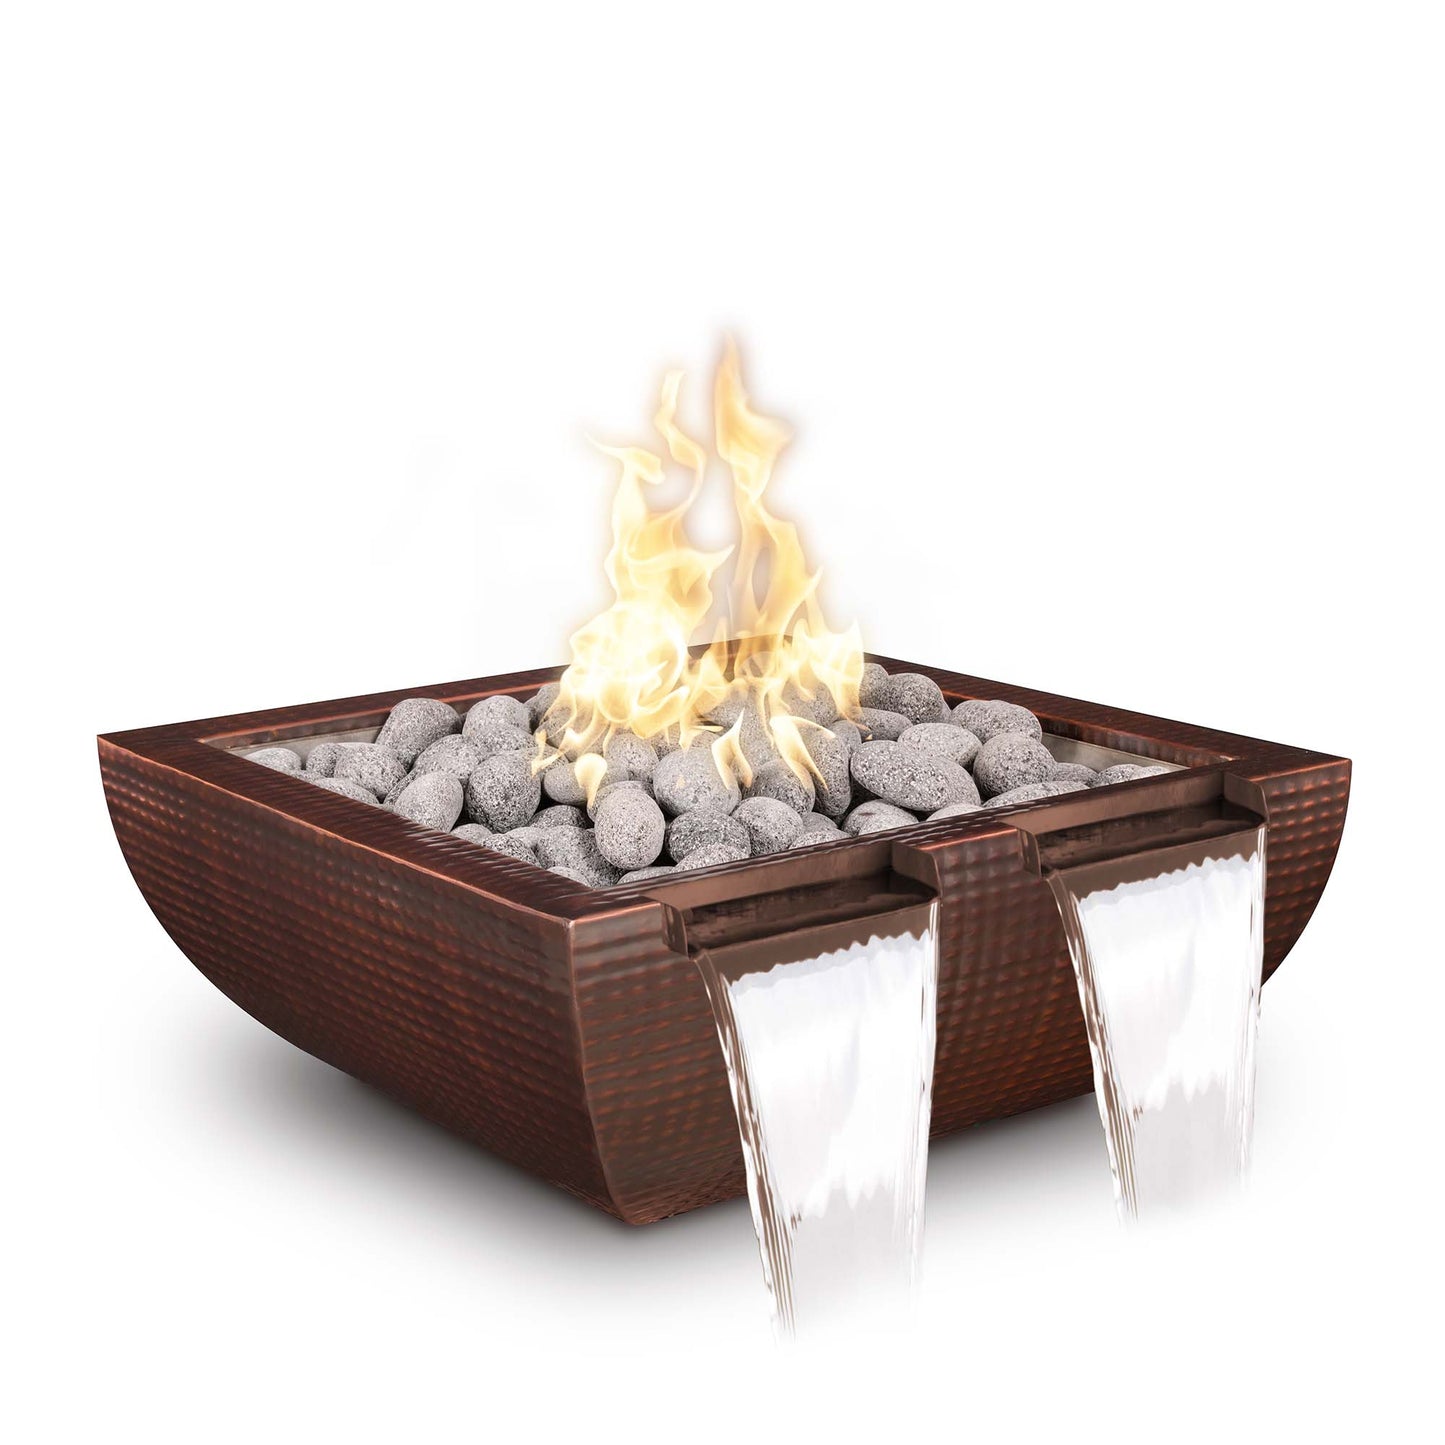 The Outdoor Plus Avalon Twin Spill 30" Silver Vein Powder Coated Metal Natural Gas Fire & Water Bowl with Match Lit with Flame Sense Ignition